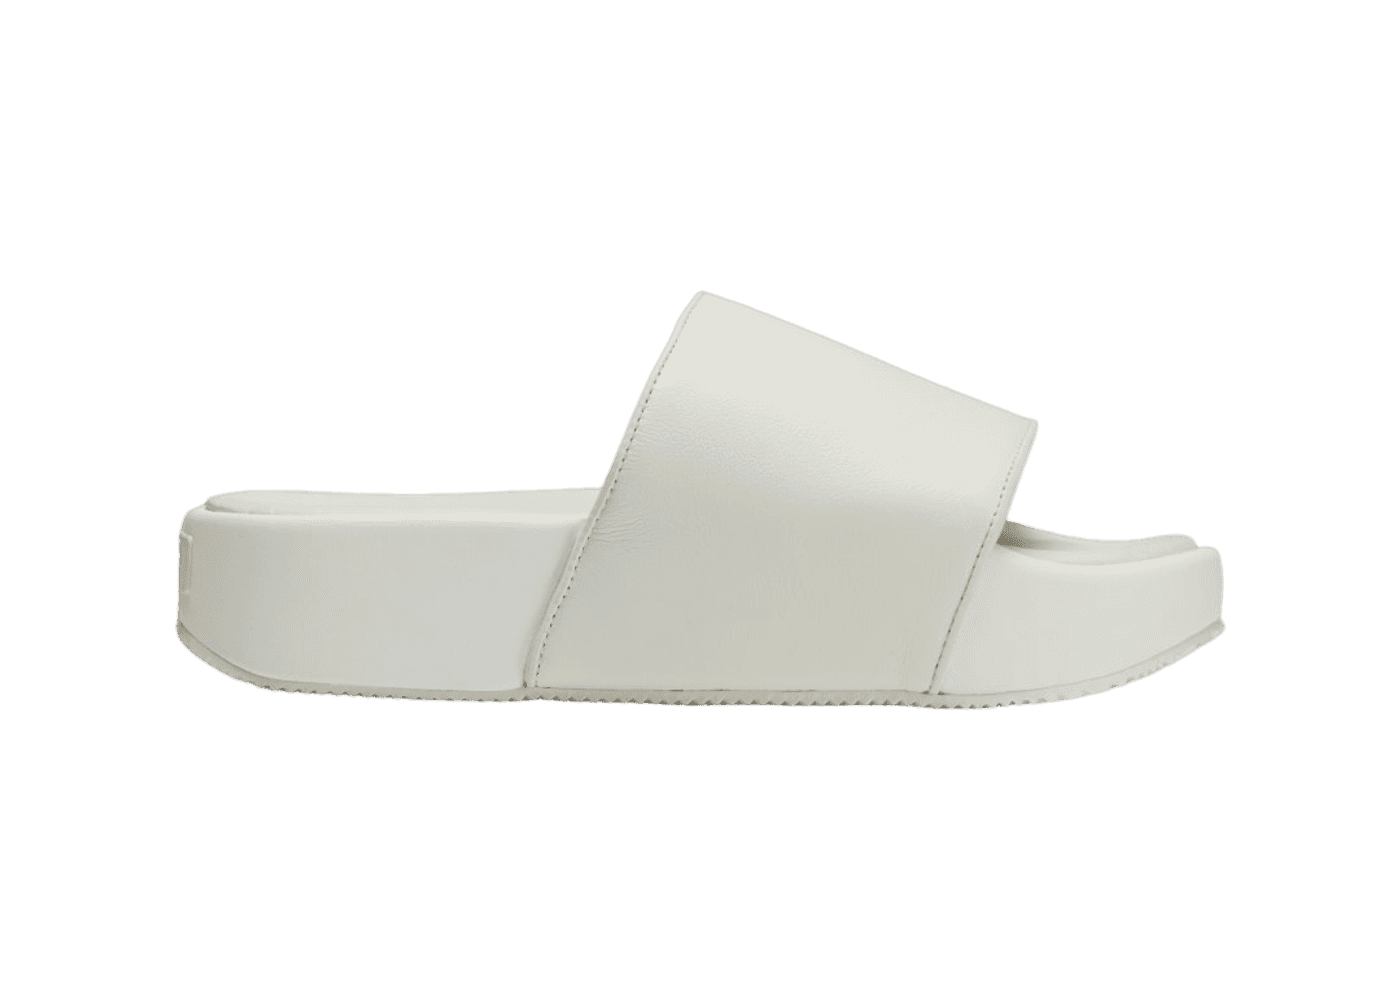 adidas Y-3 Slide 'Off White' - FZ6402 Raffles and Release Date